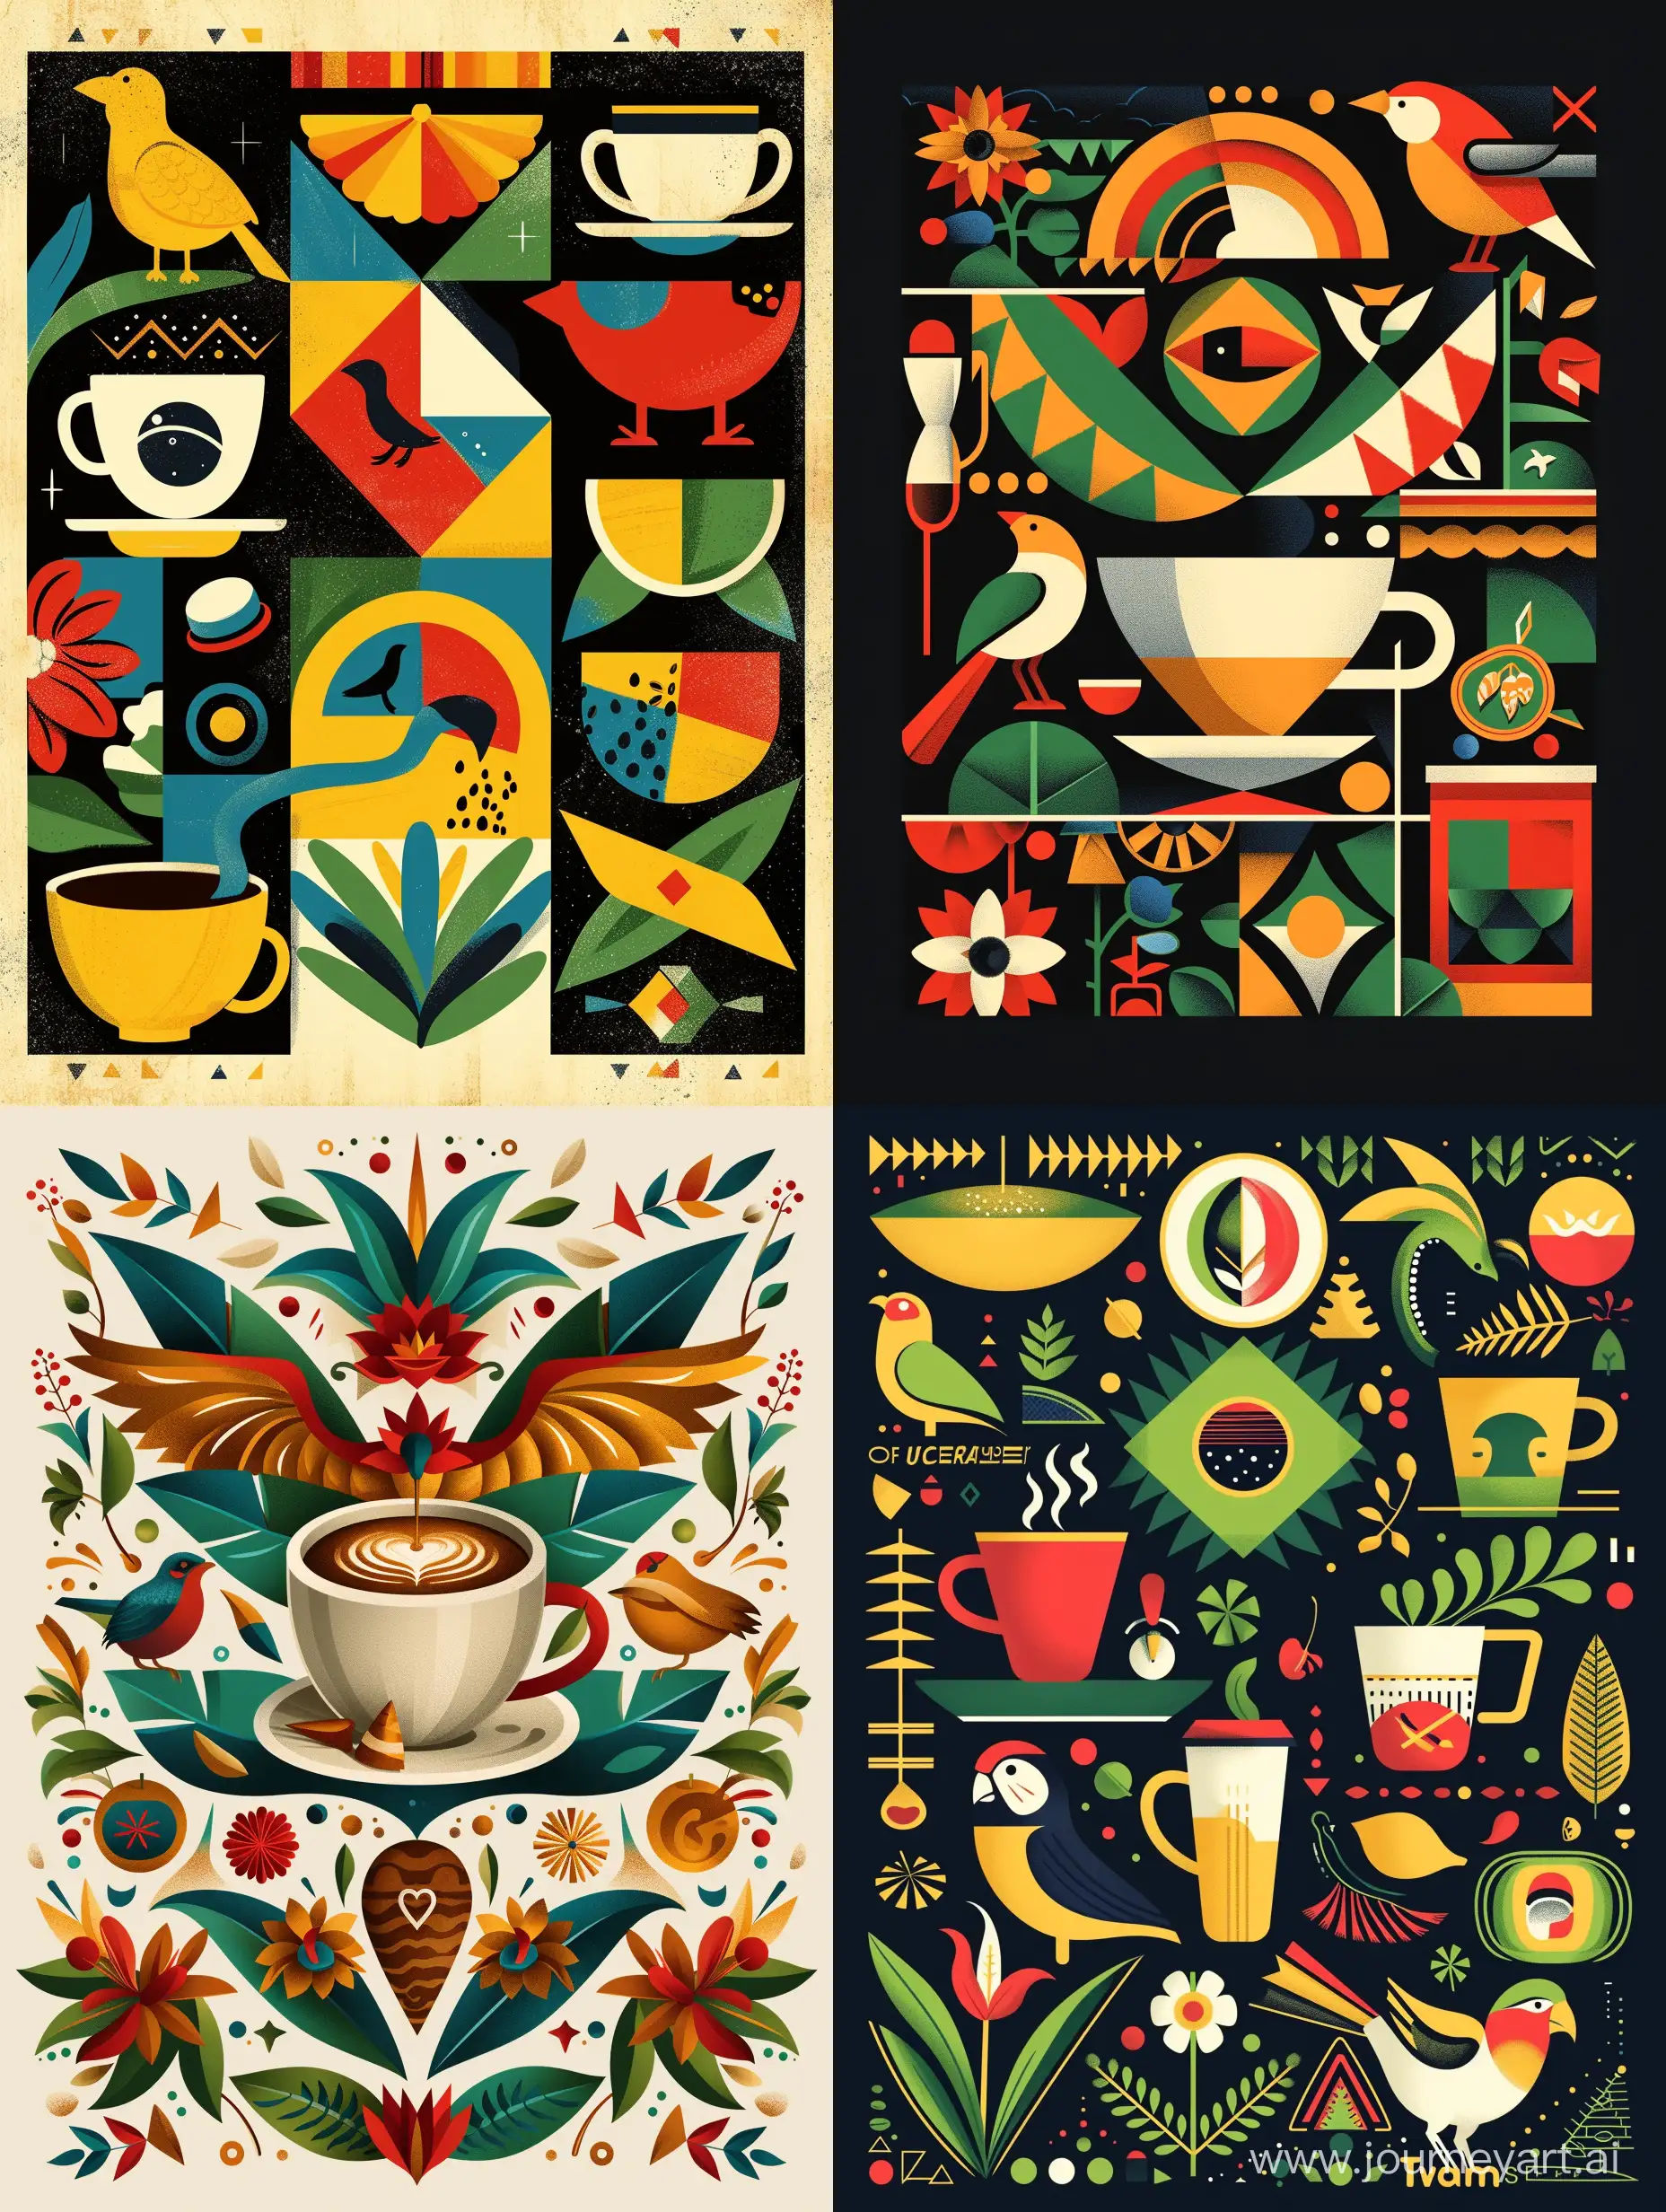 Modern-Abstract-Coffee-Geometric-Ornament-with-Brazilian-Symbols-and-Wildlife